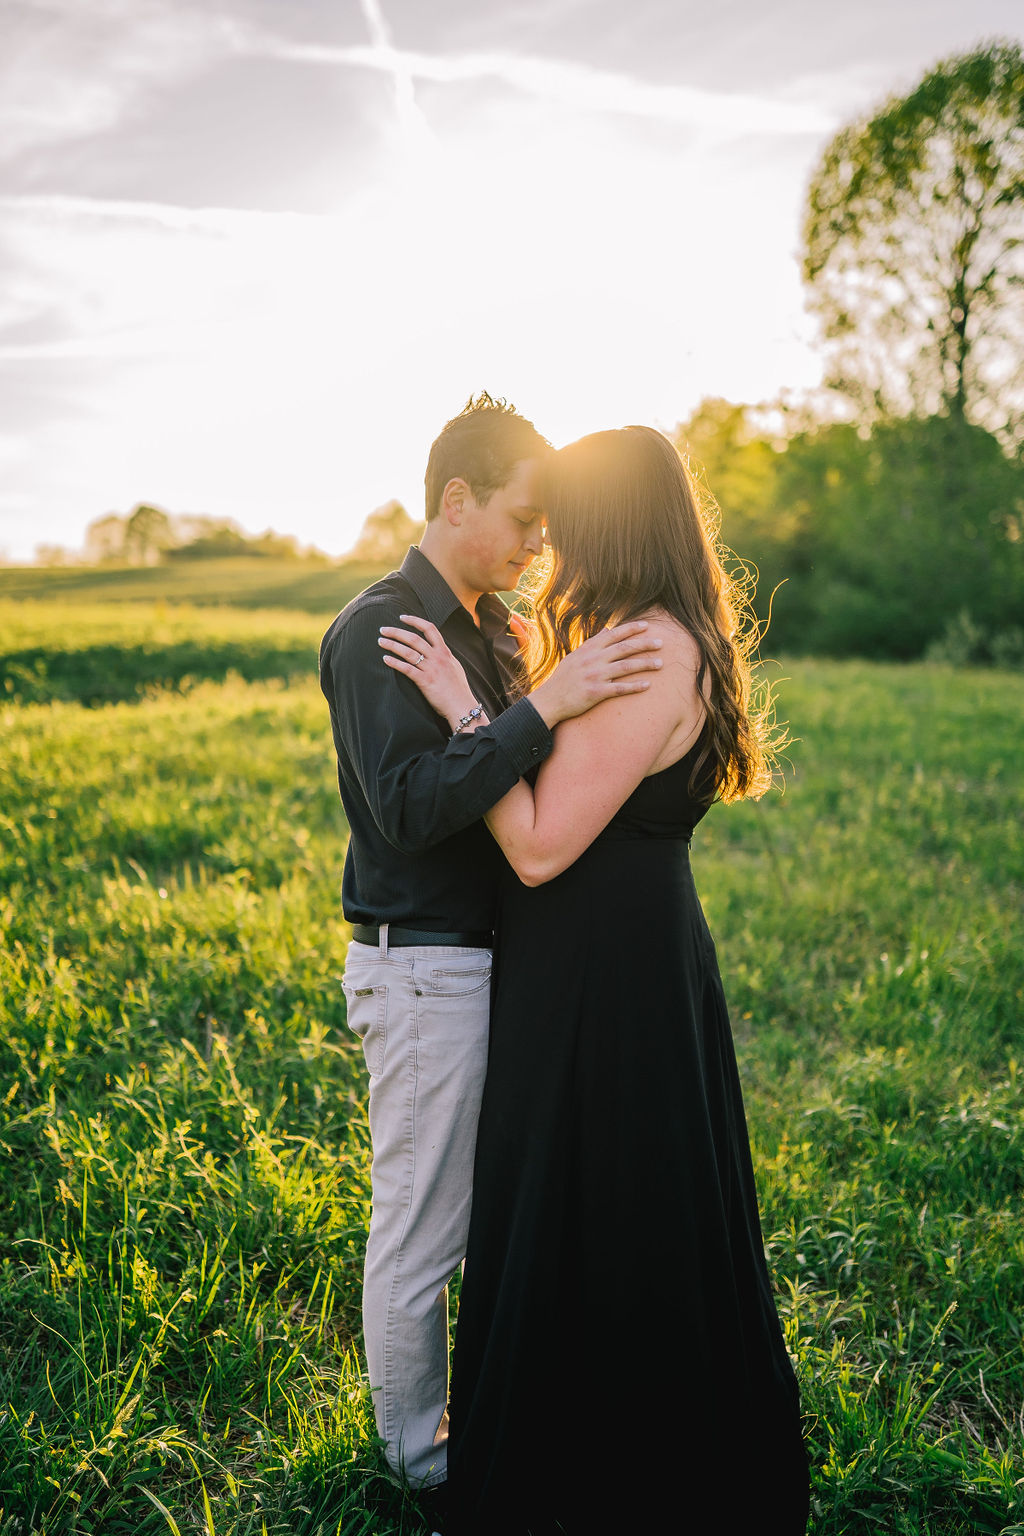 sun setting behind man and woman as they embrace each other in a grassy field with a tree line behind them in Meads Quarry Tennessee for their engagement session